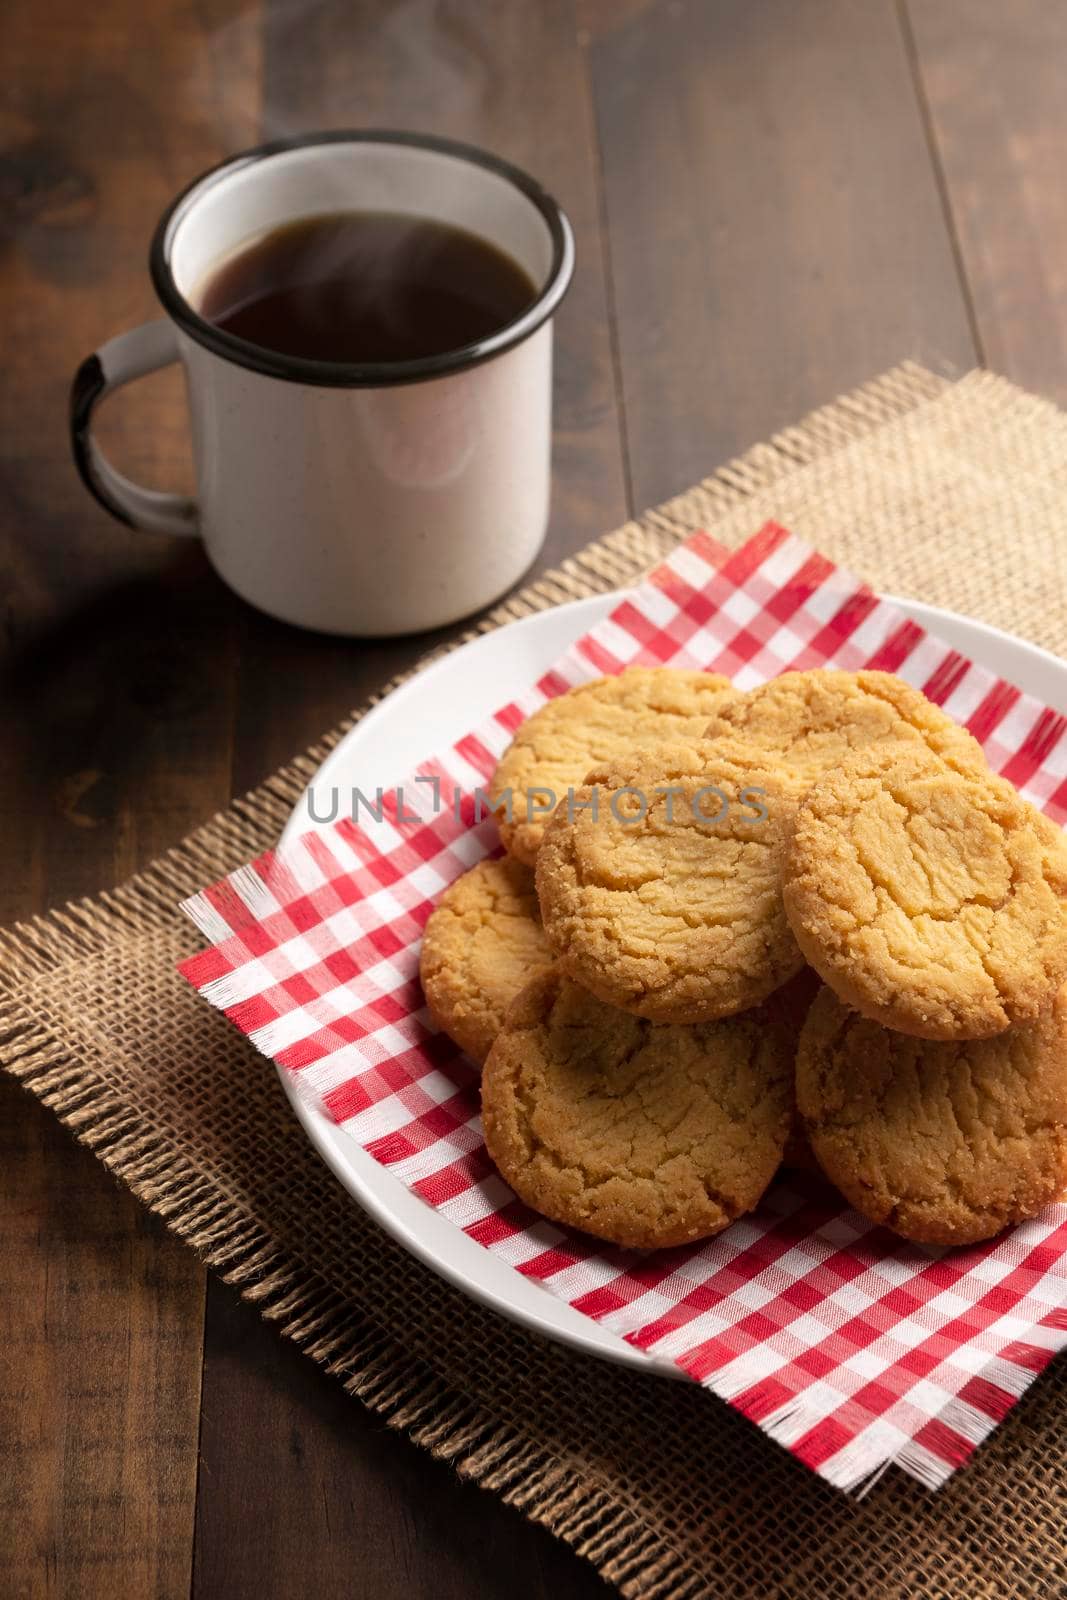 Homemade crunchy cookies and a black coffee cup on wooden rustic table